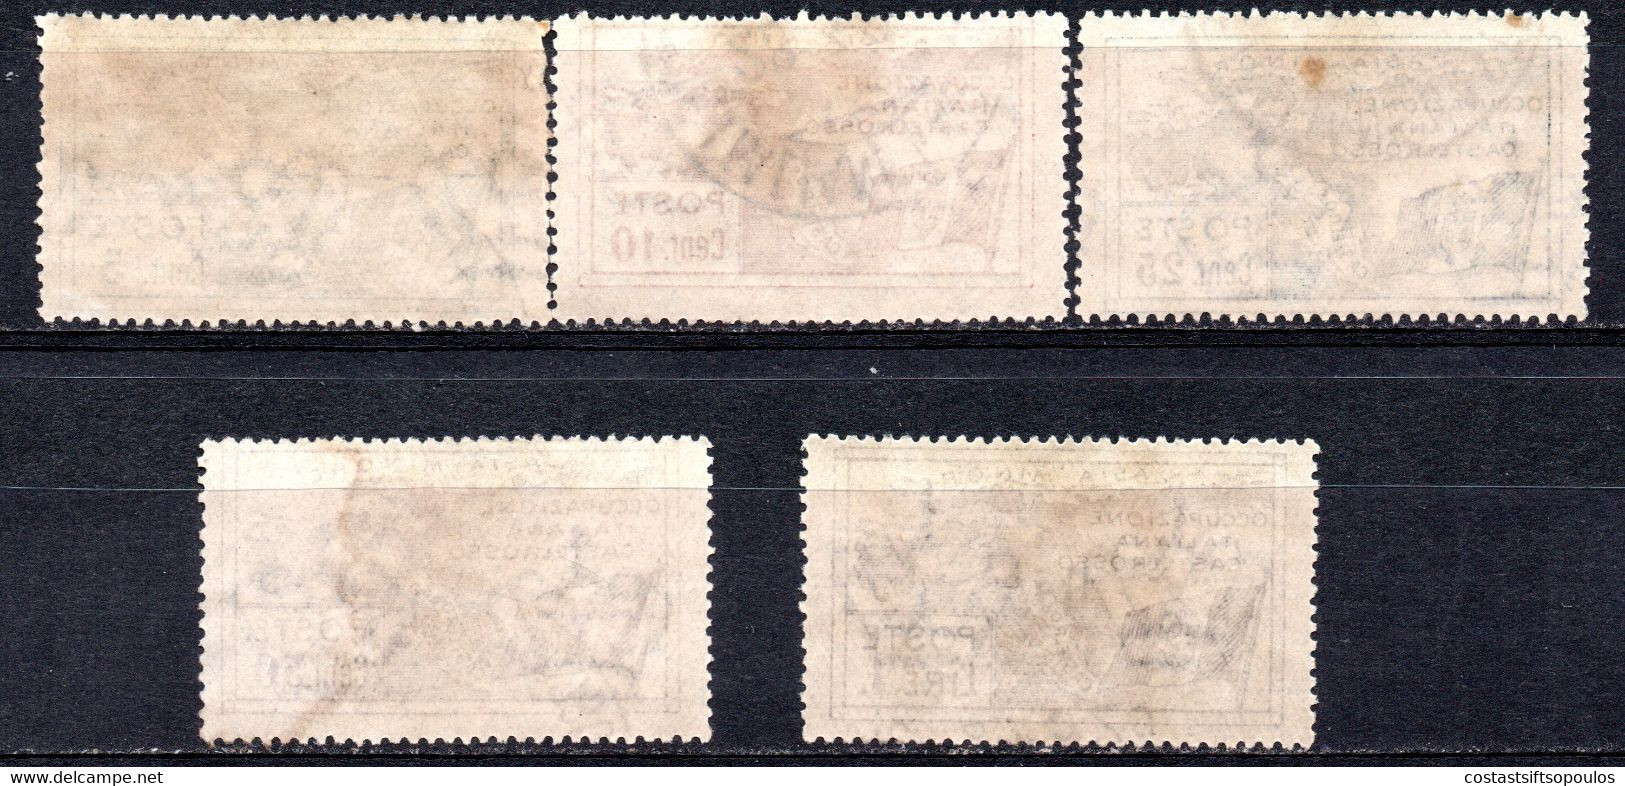 1441.GREECE,ITALY, DODECANESE.KASTELLORIZO,CASTELROSSO. 1923 HELLAS 26-30.FREE SHIPPING BY REGISTERED MAIL. - Dodecanese